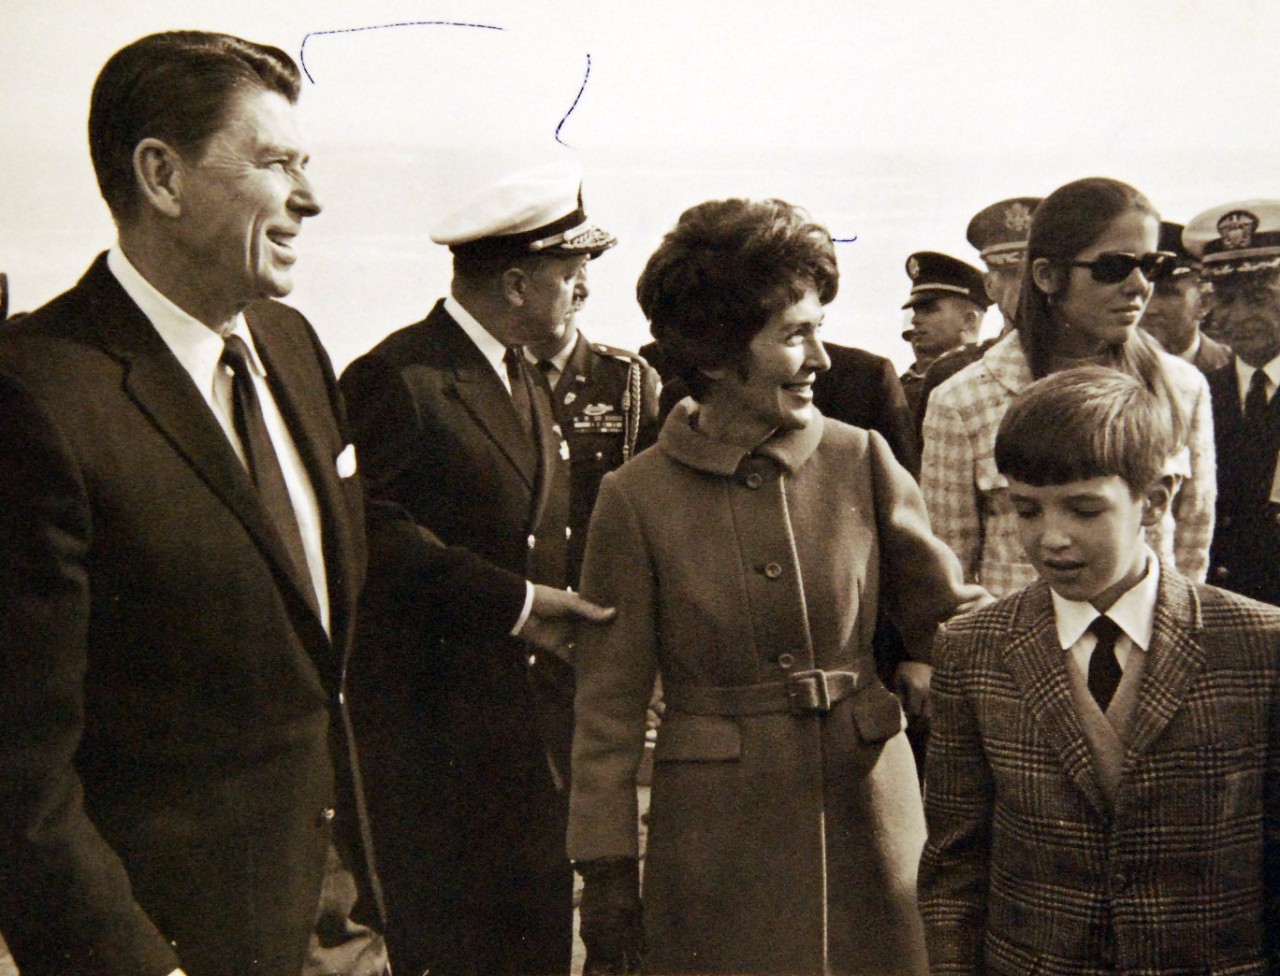 428-GX-USN-1140239:   San Diego, California, December 24, 1968.   Governor Ronald Reagan of California and Mrs. Reagan mingle with members of a crowd awaiting the arrival of crewmen of USS Pueblo (AGER-2) who are flying from the Republic of Korea.  Official U.S. Navy Photograph, now in the collections of the National Archives.  (2017/05/23).  Photographed from reference card.   